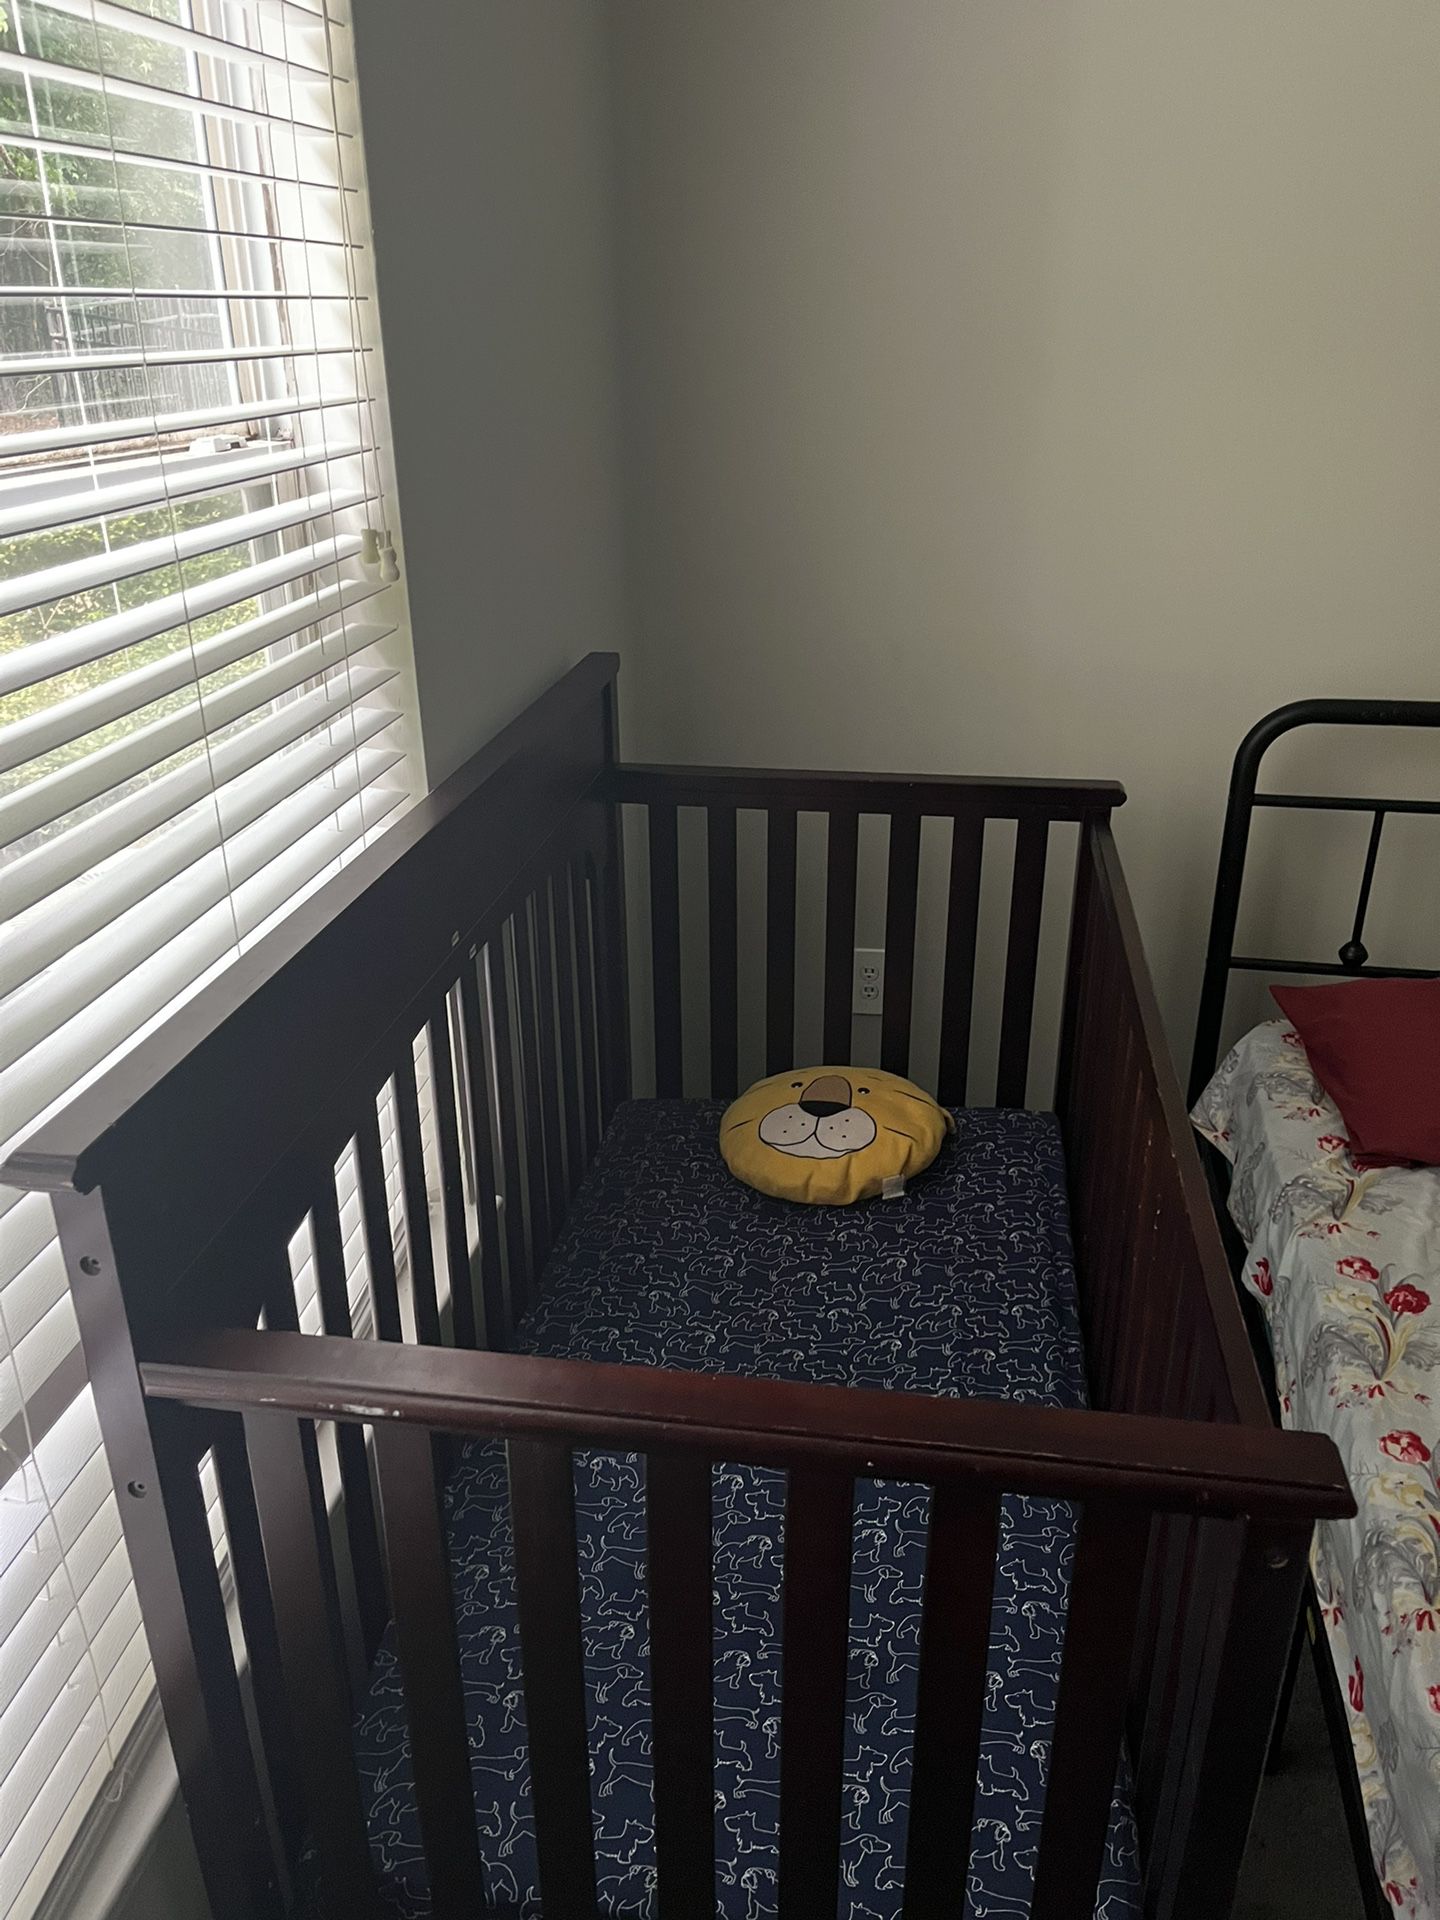 4 In 1 Crib With toddler mattress